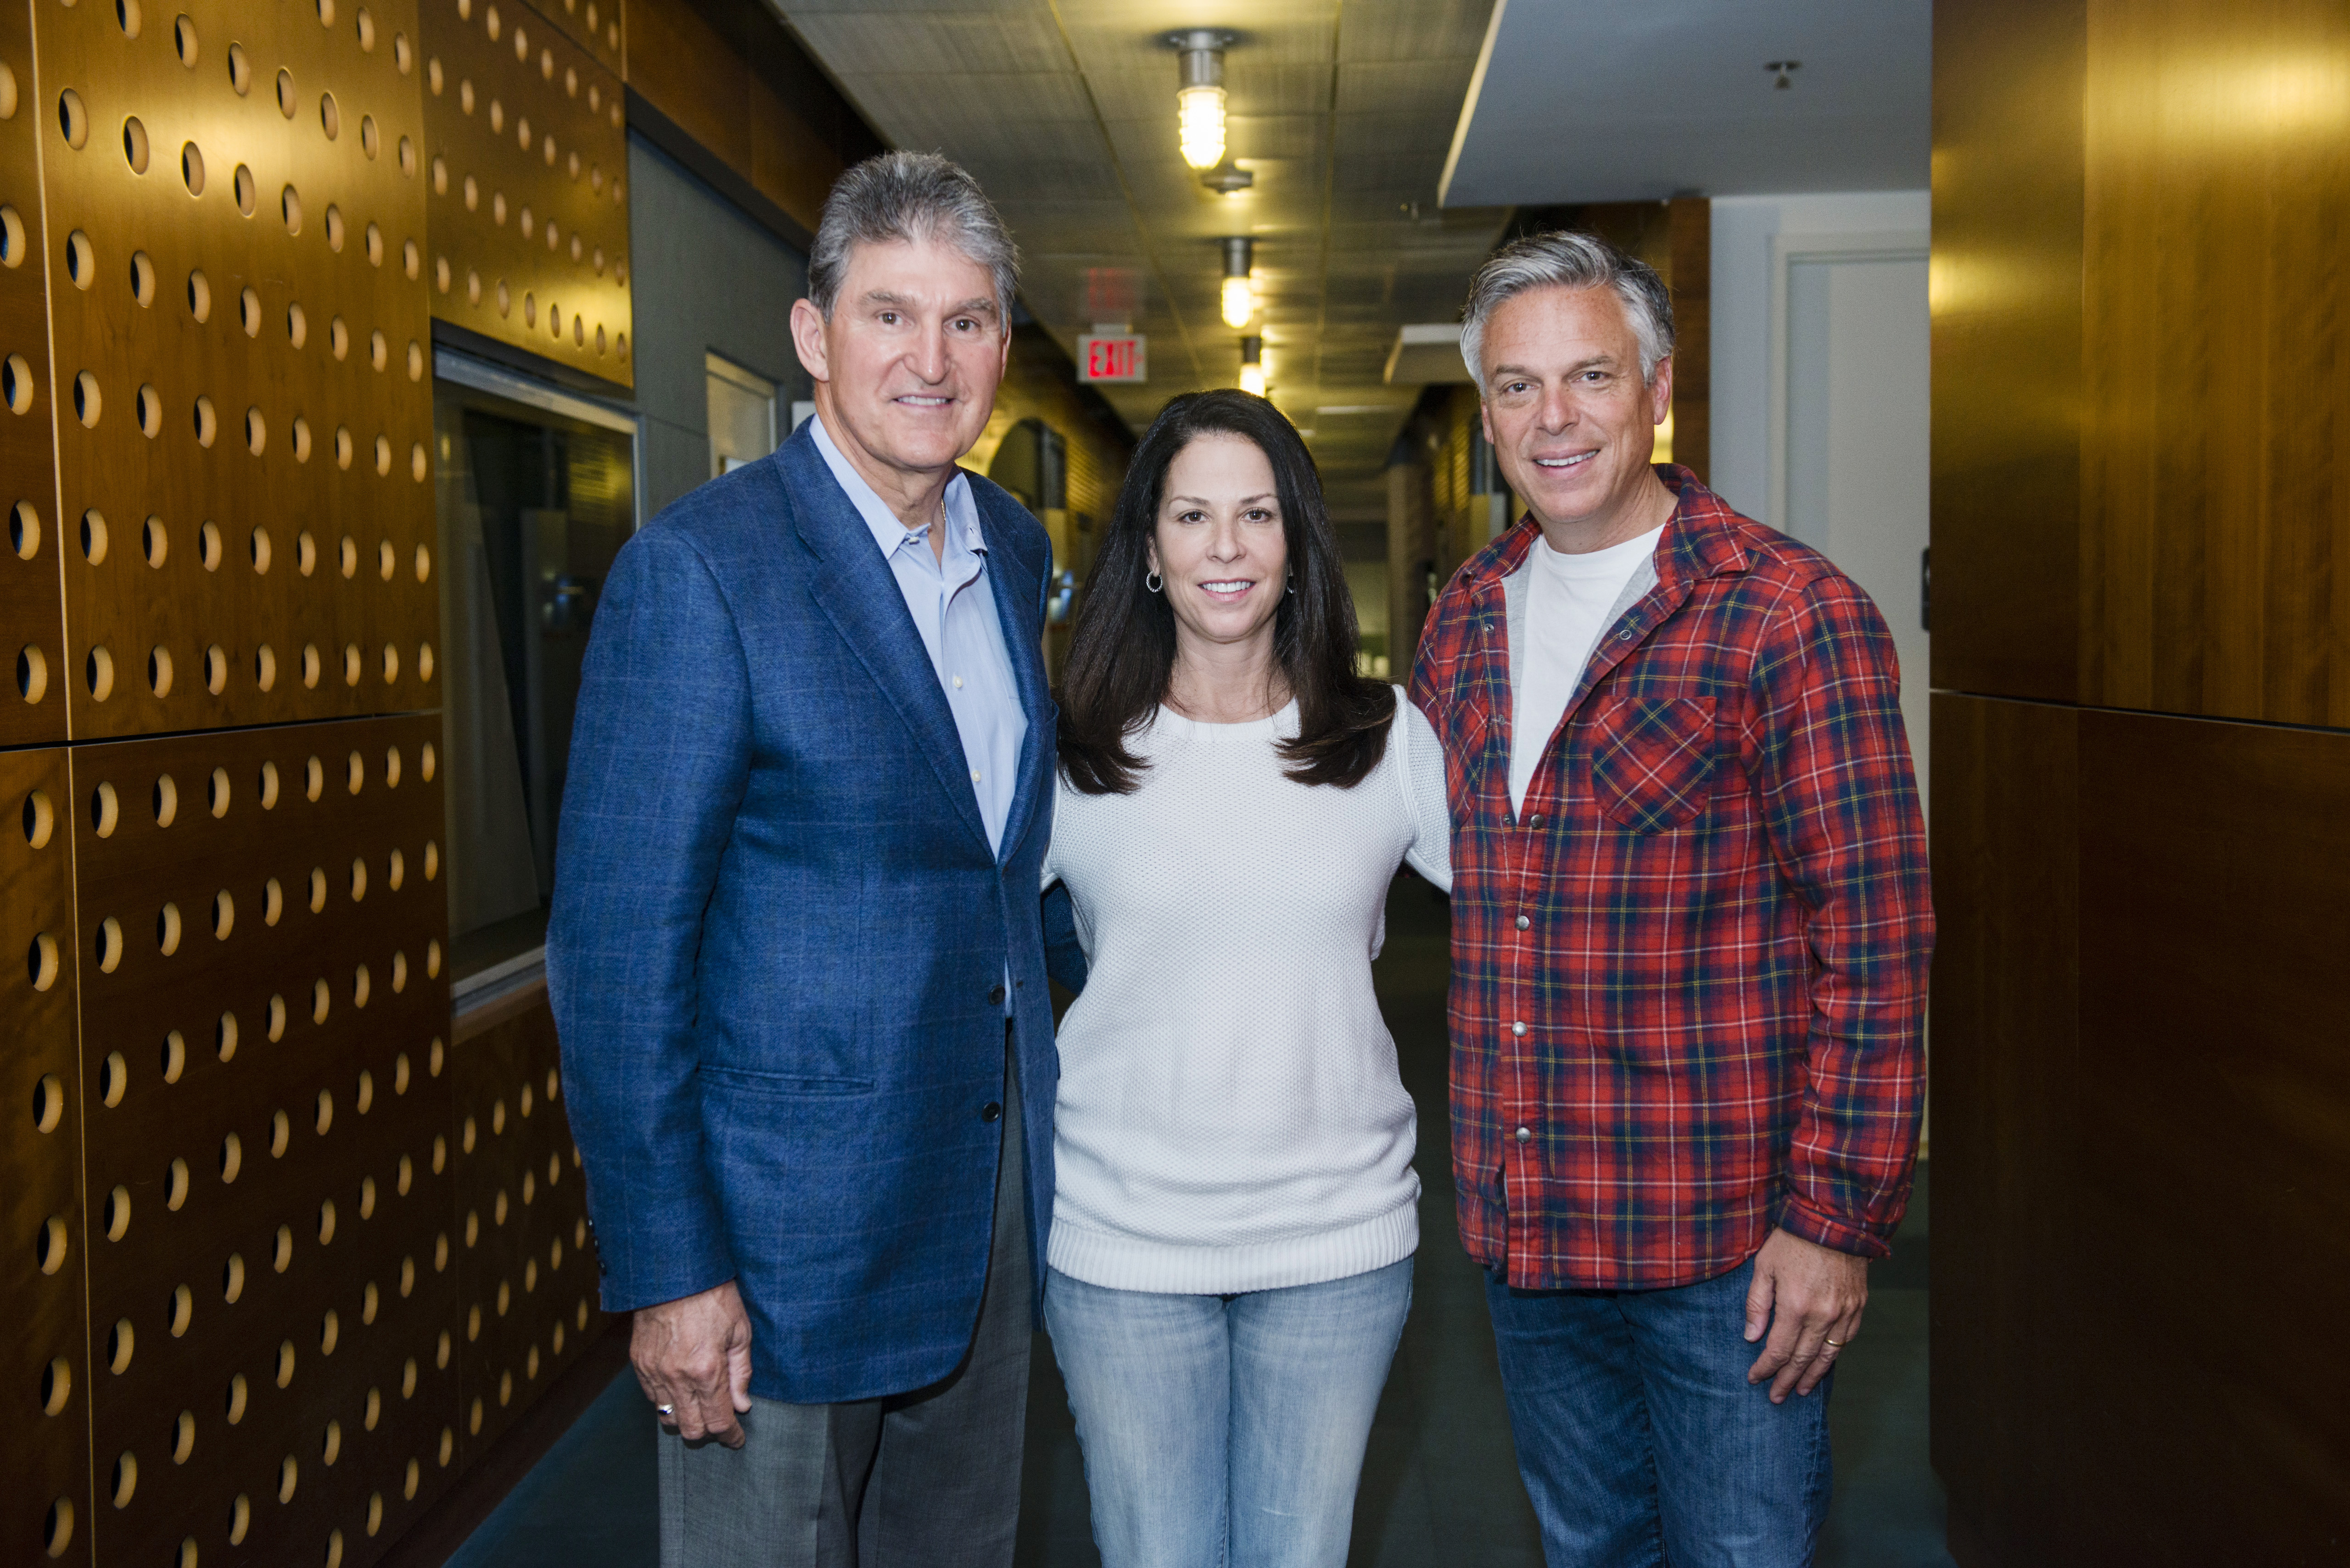 Senator Joe Manchin (L), Nancy Jacobson, founder and president of No Labels (M), and Governor Jon Huntsman (R), pose for a photo following SiriusXM's No Labels Radio program at the SiriusXM Studio on May 3, 2014 in Washington, D.C.